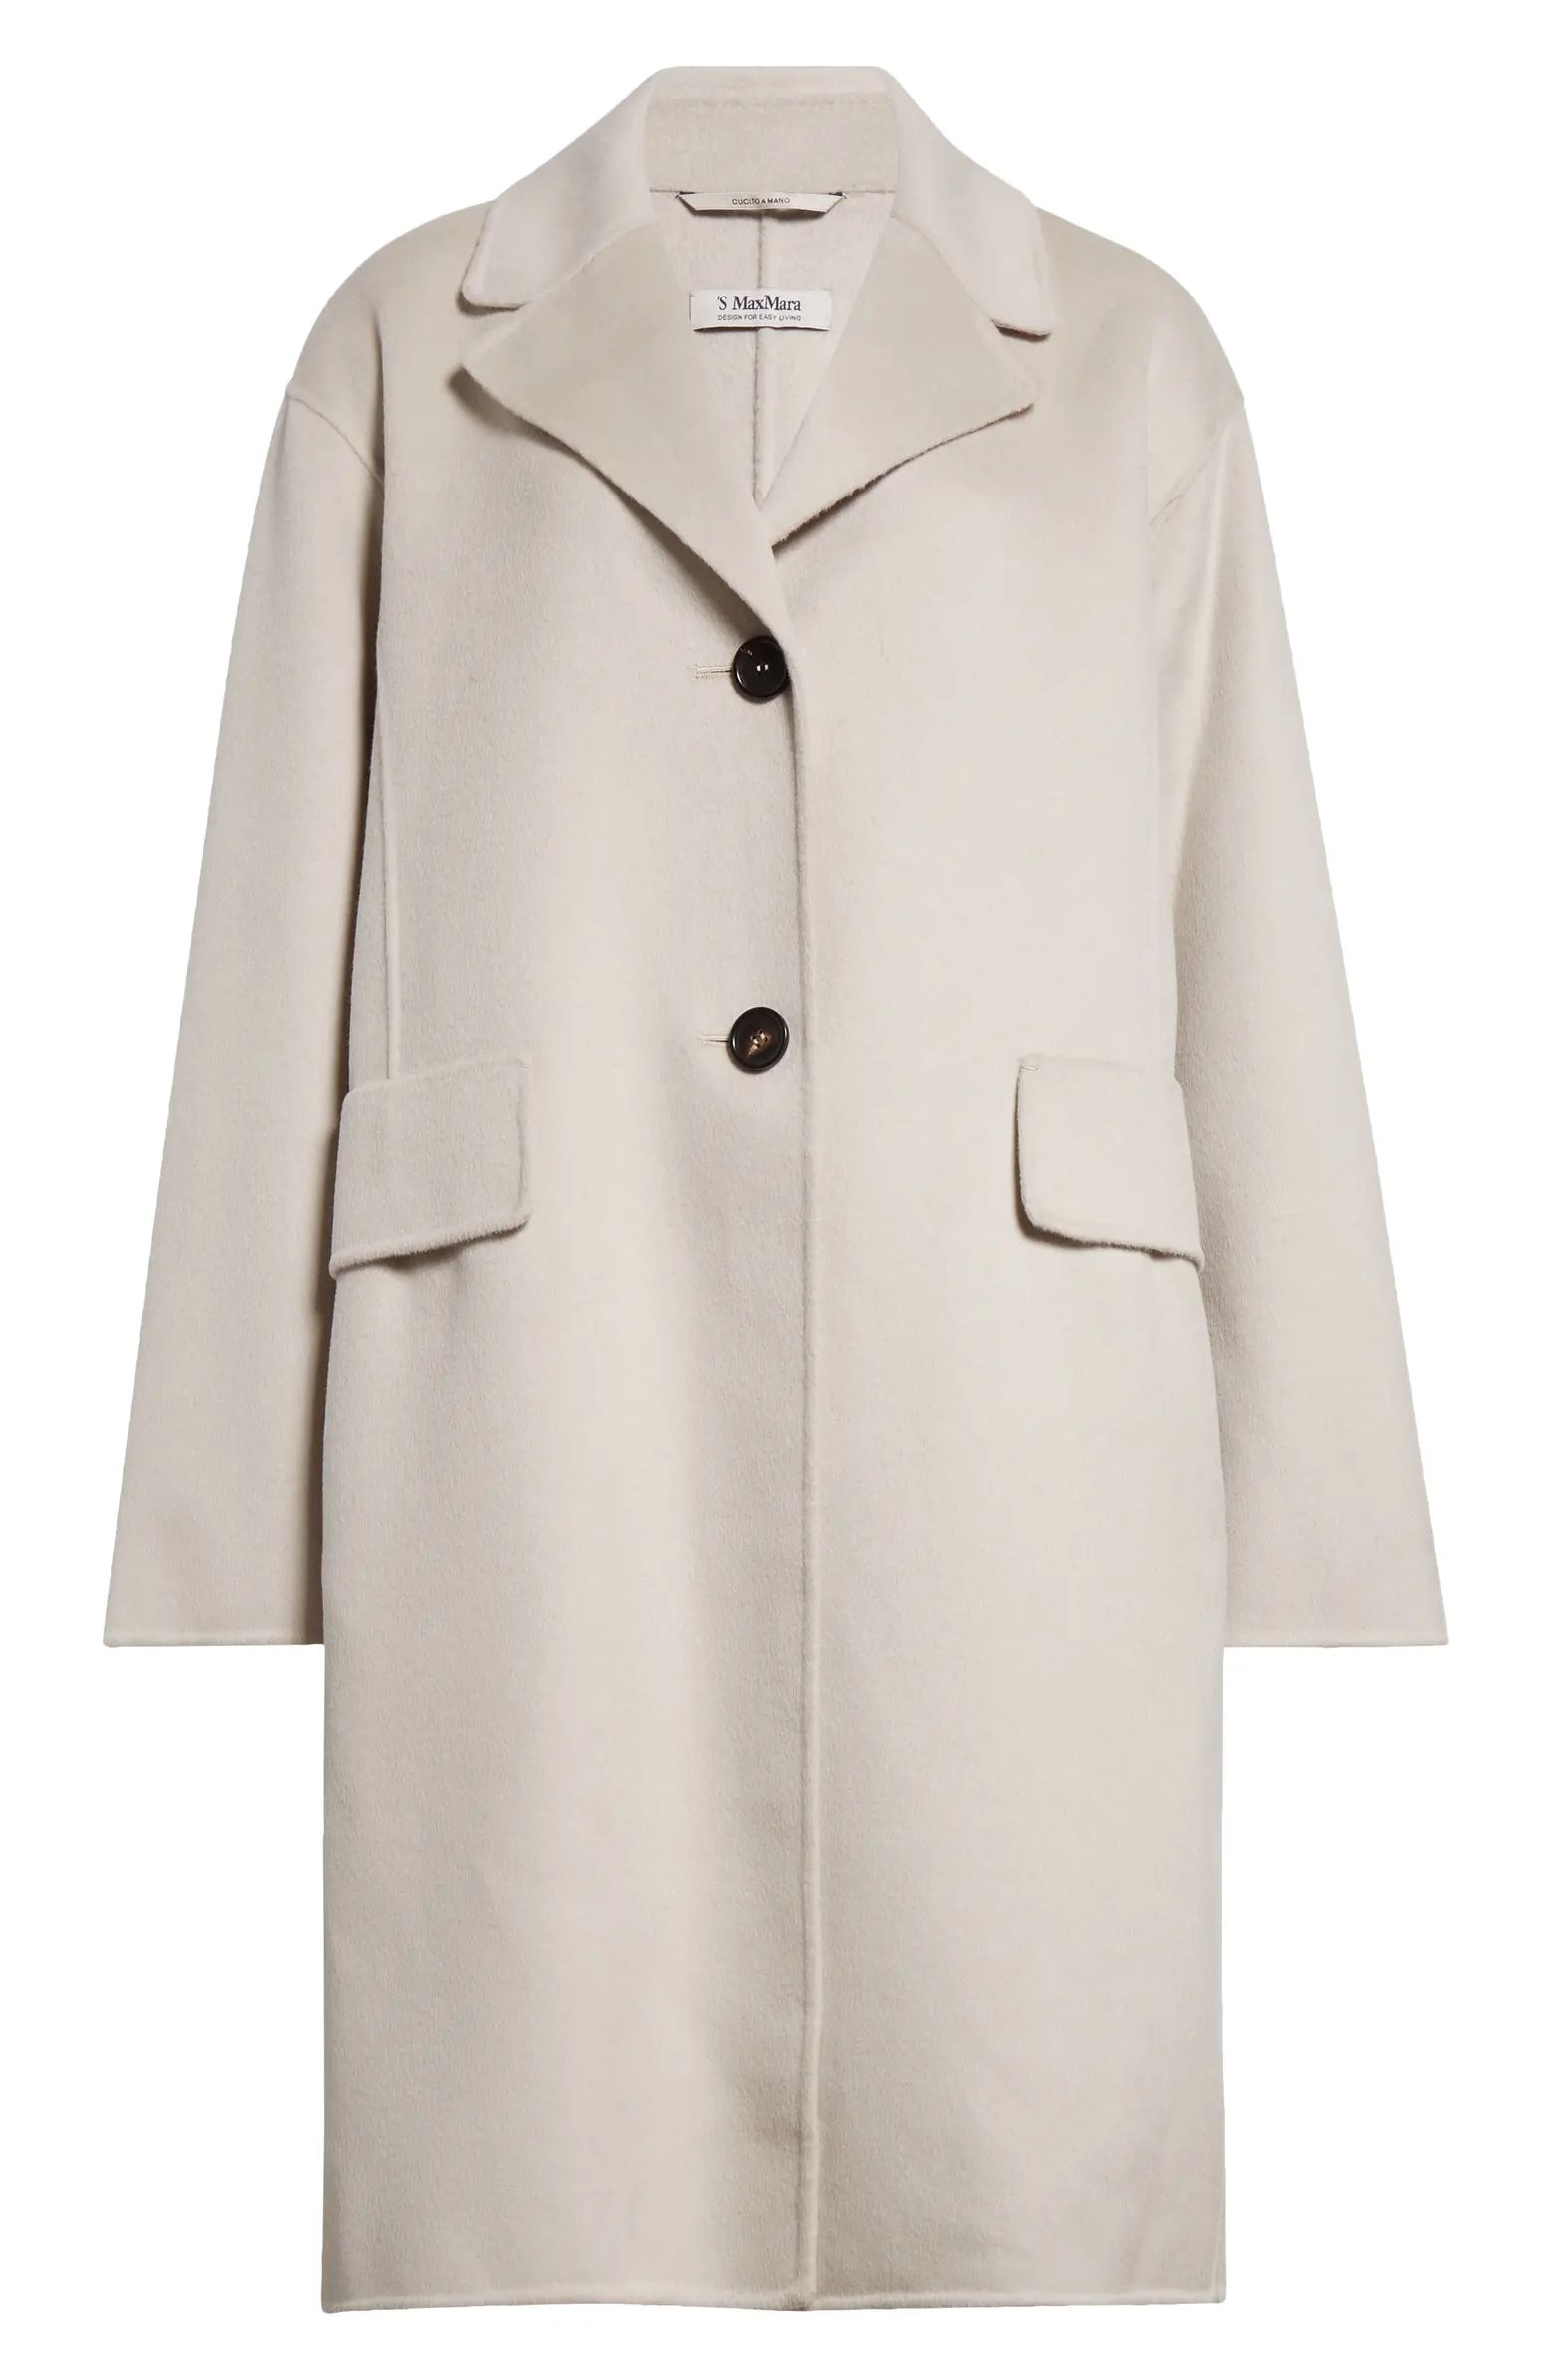 Double Face Wool Coat | Nordstrom